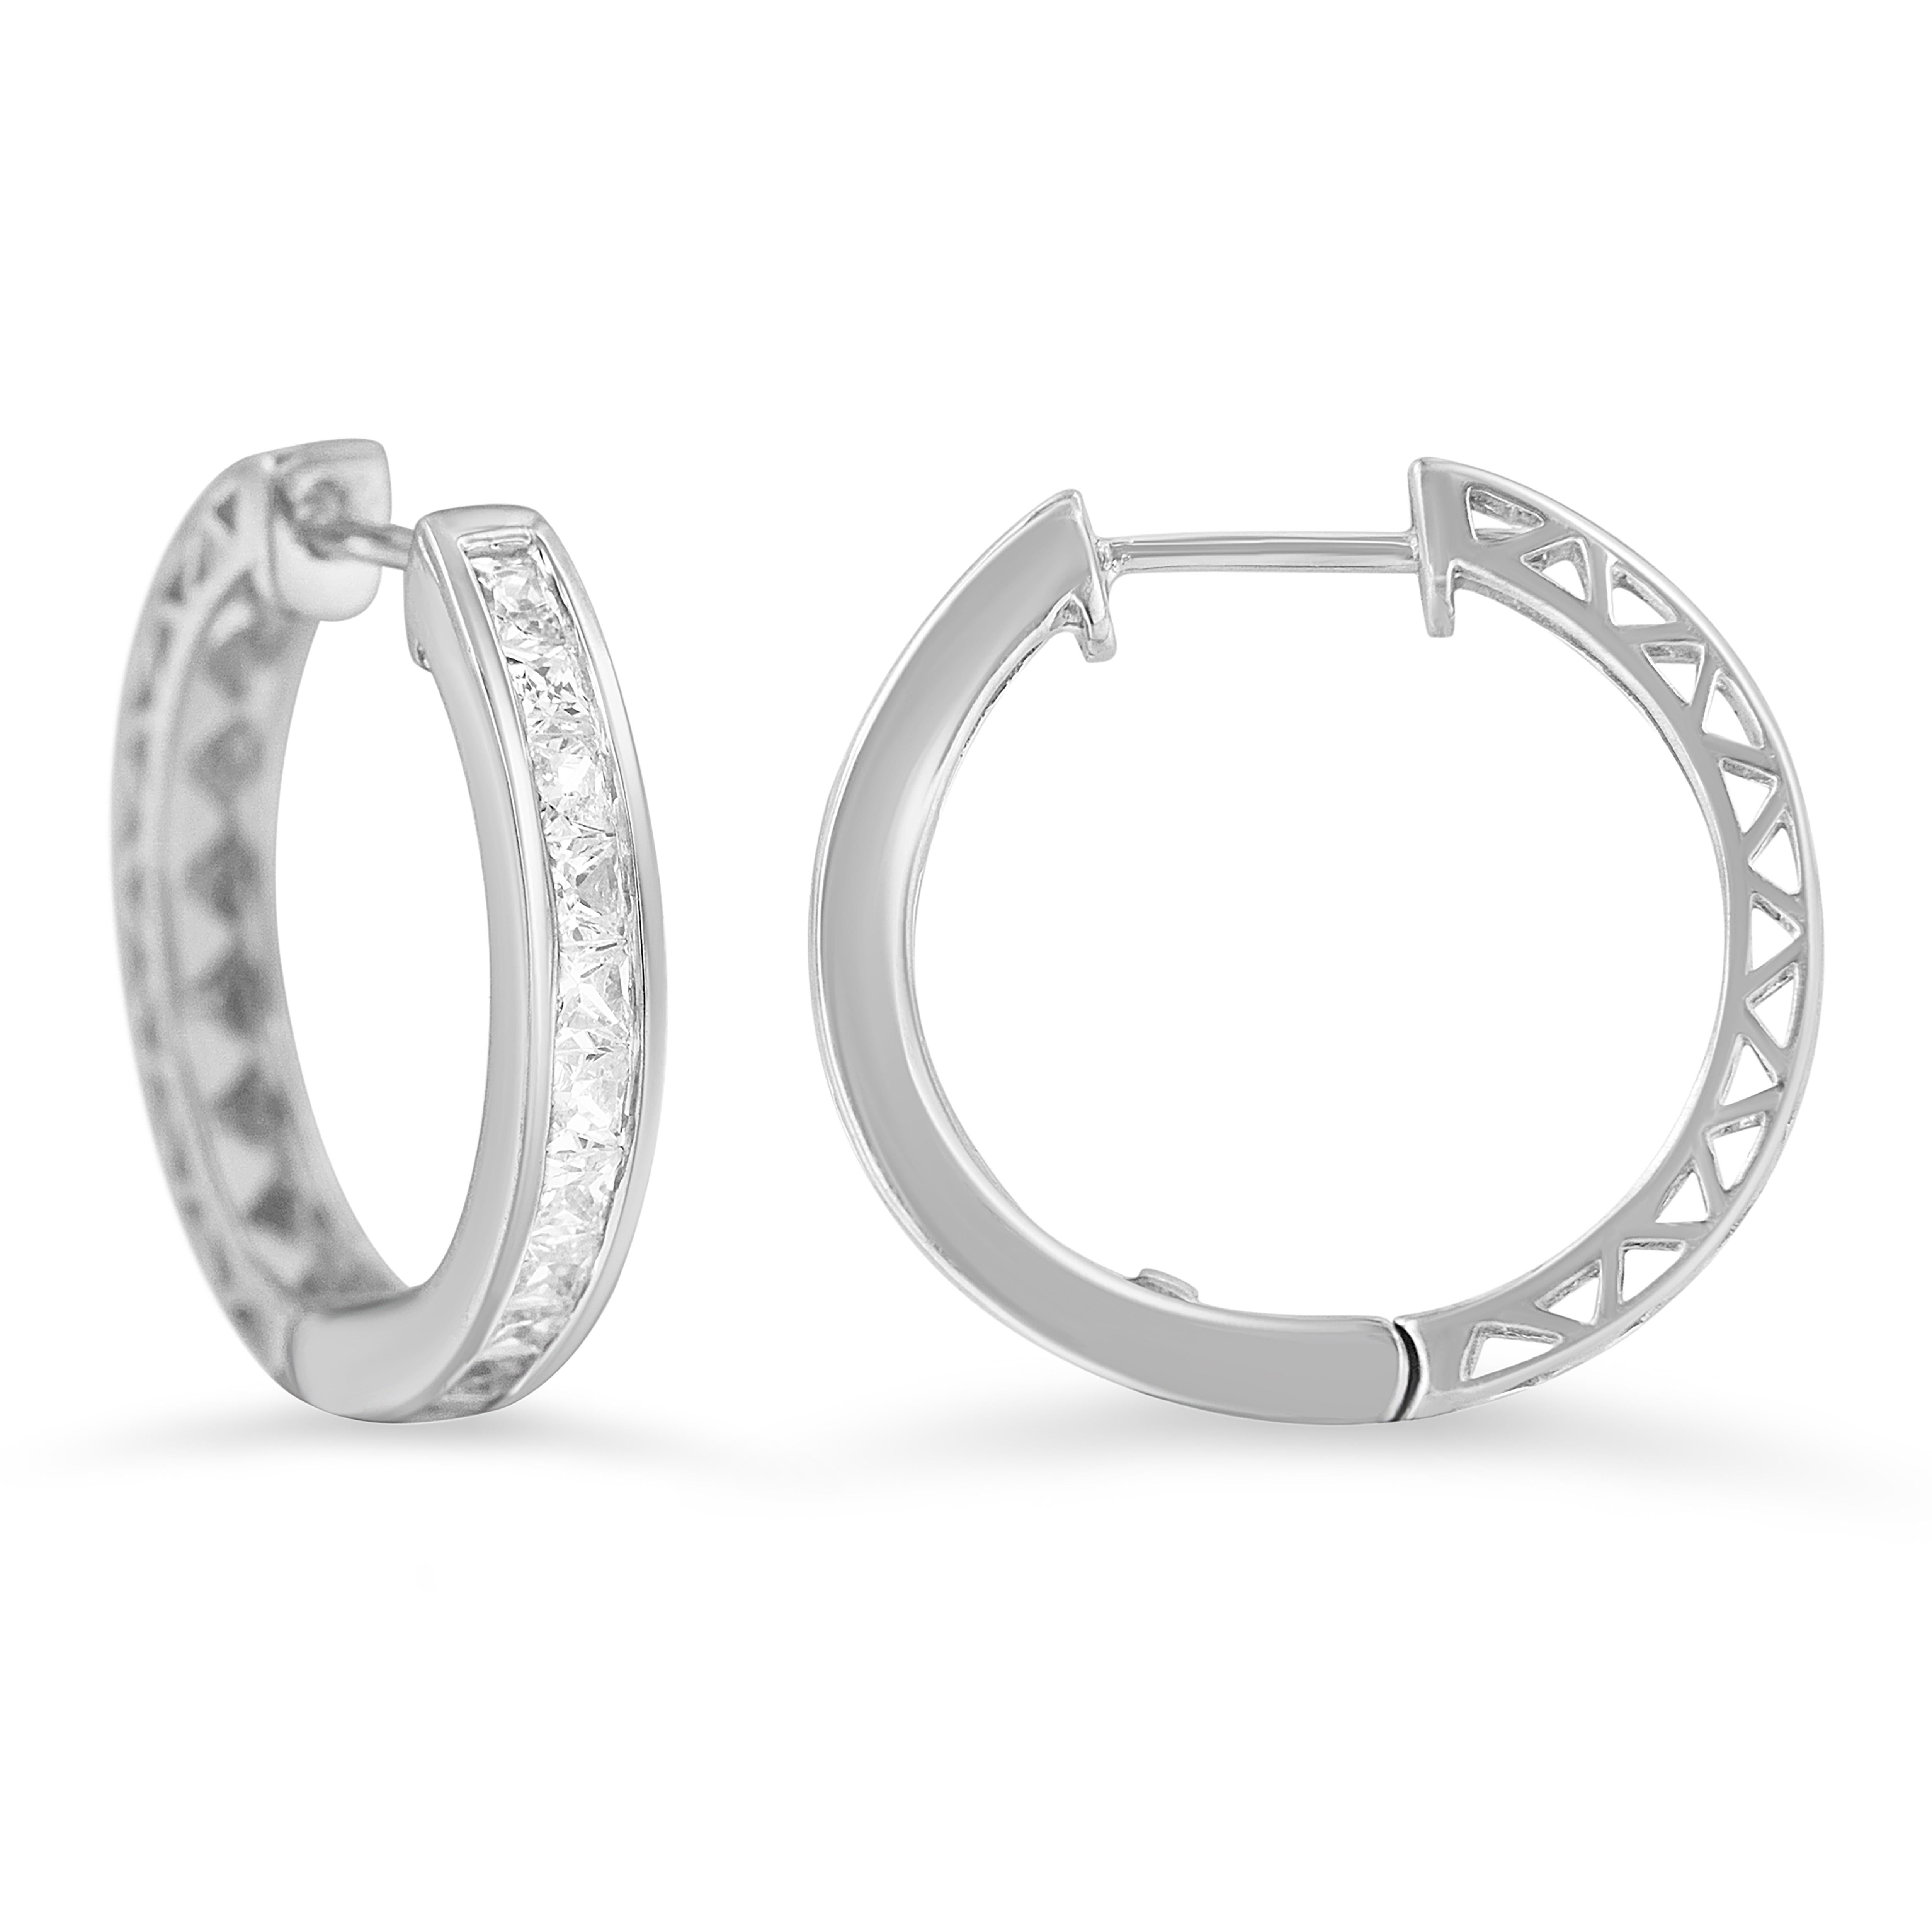 A classic pair of diamond hoop earrings features 18 princess cut diamonds channel-set into 10kt white gold hoops. They have a total diamond weight of 1 carat. These diamonds are color rated as I-J Color, and clarity graded as I2-I3 Clarity. Make